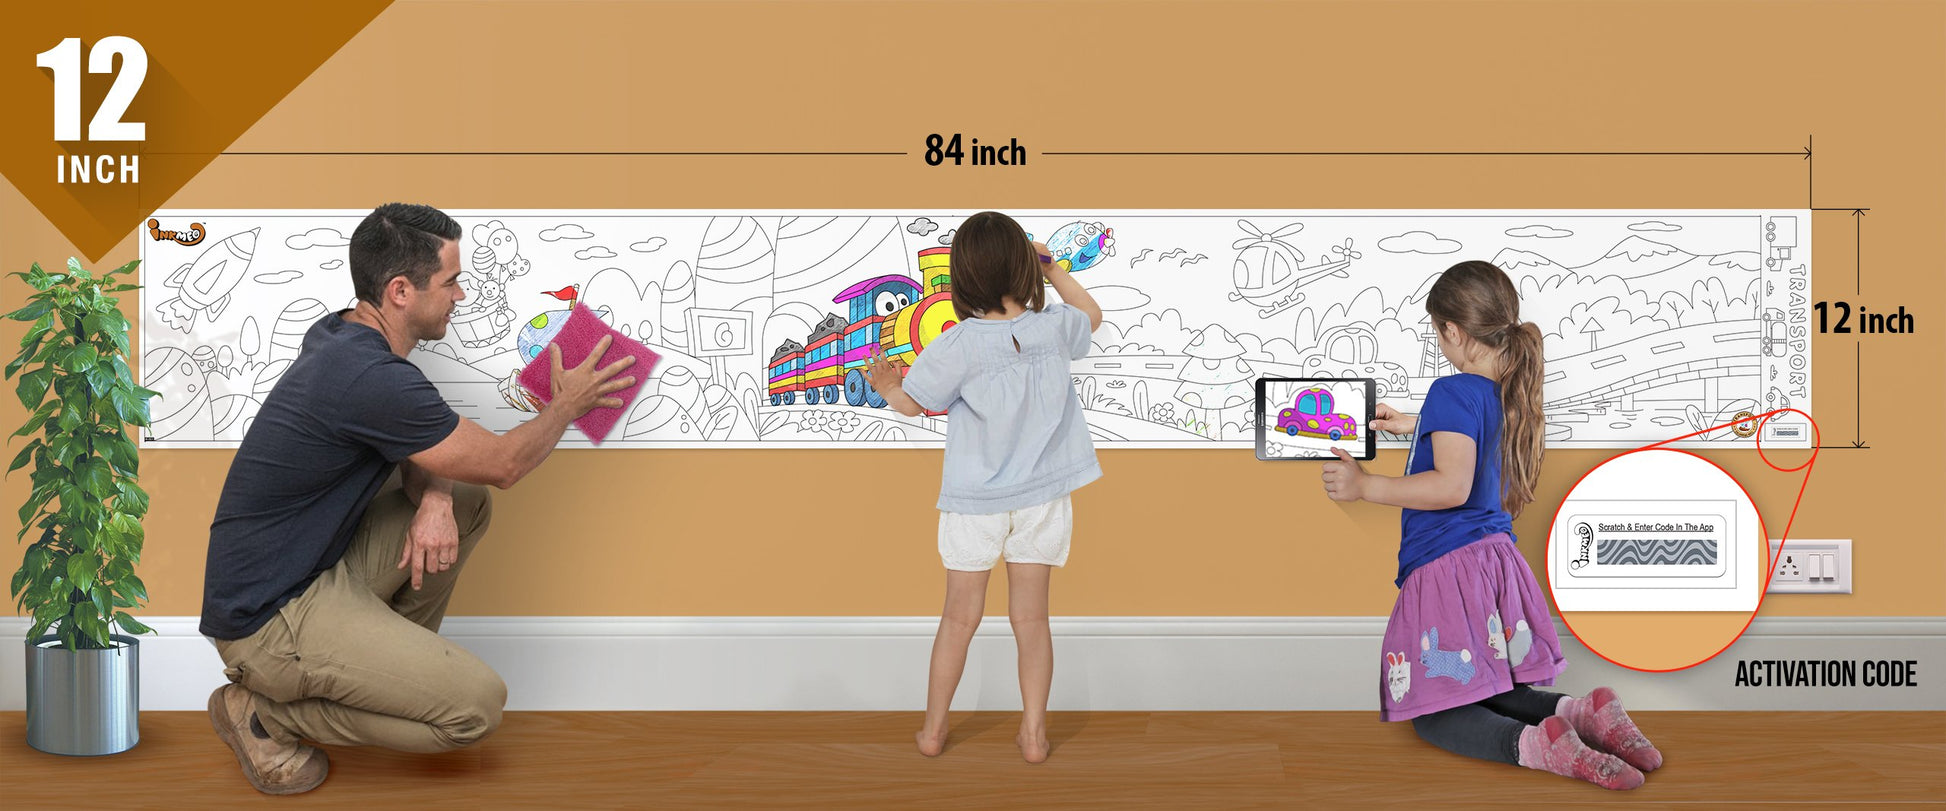 The image depicts a father and his two daughters enjoying a bonding moment while colouring transport sheet attached to the wall.